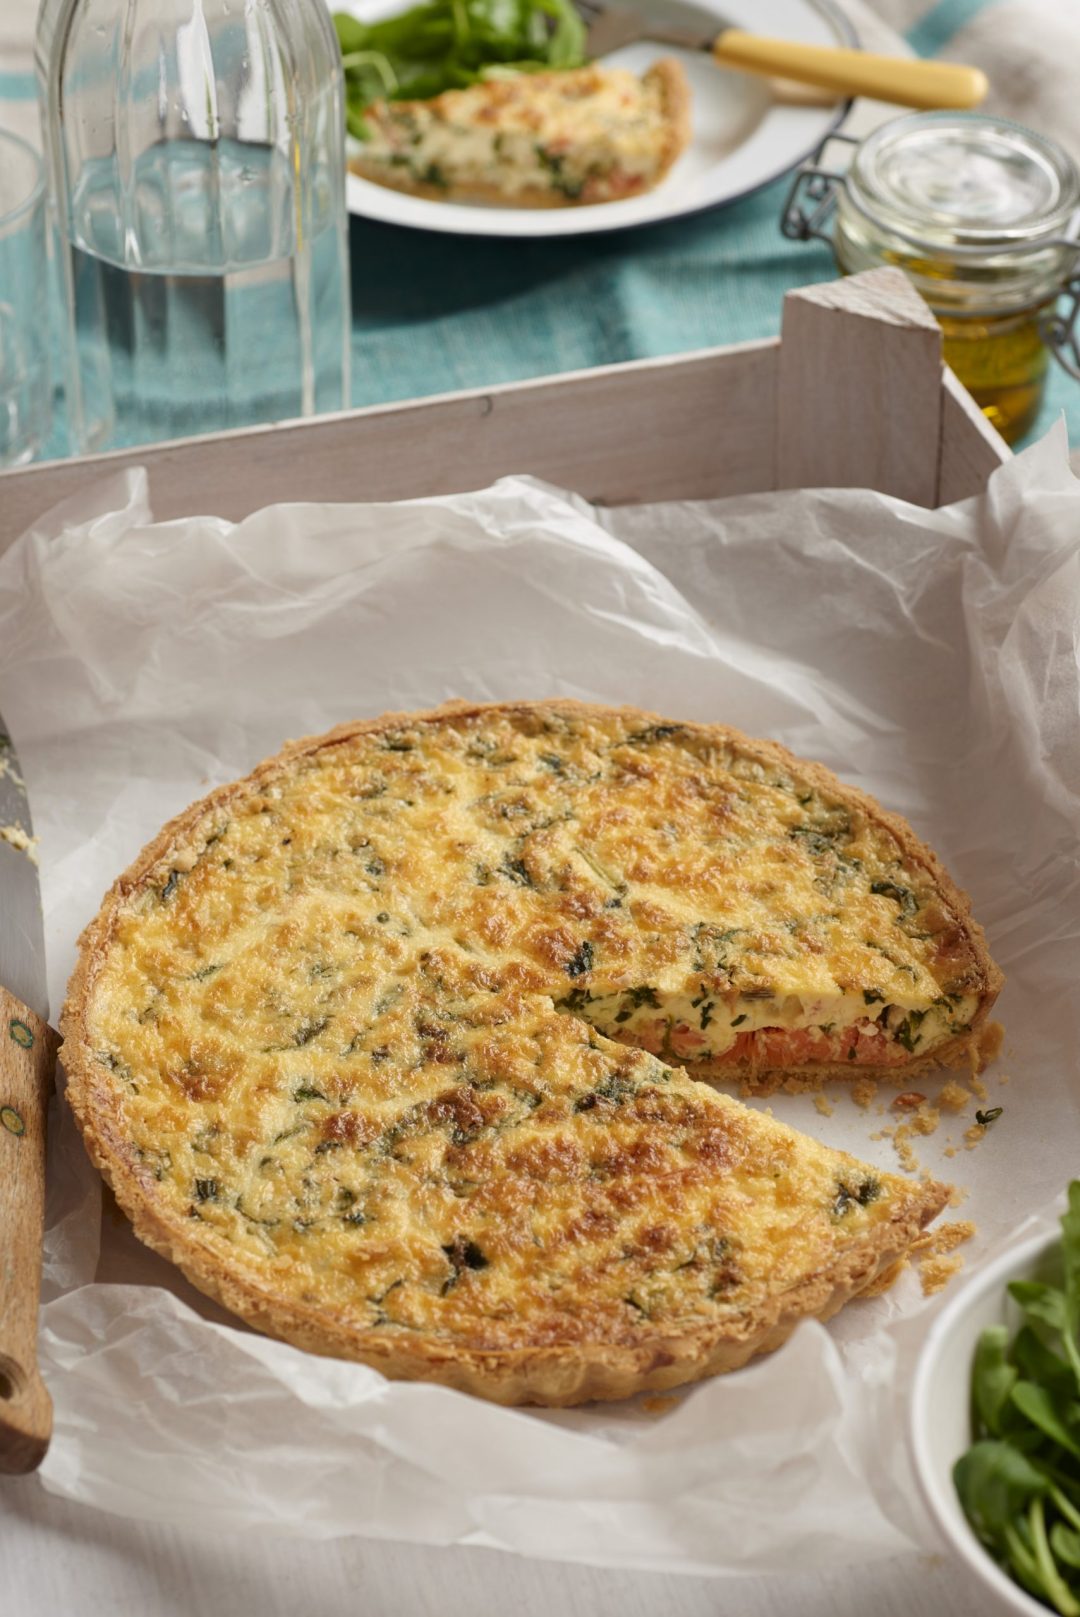 Smoked trout, duck egg and watercress quiche